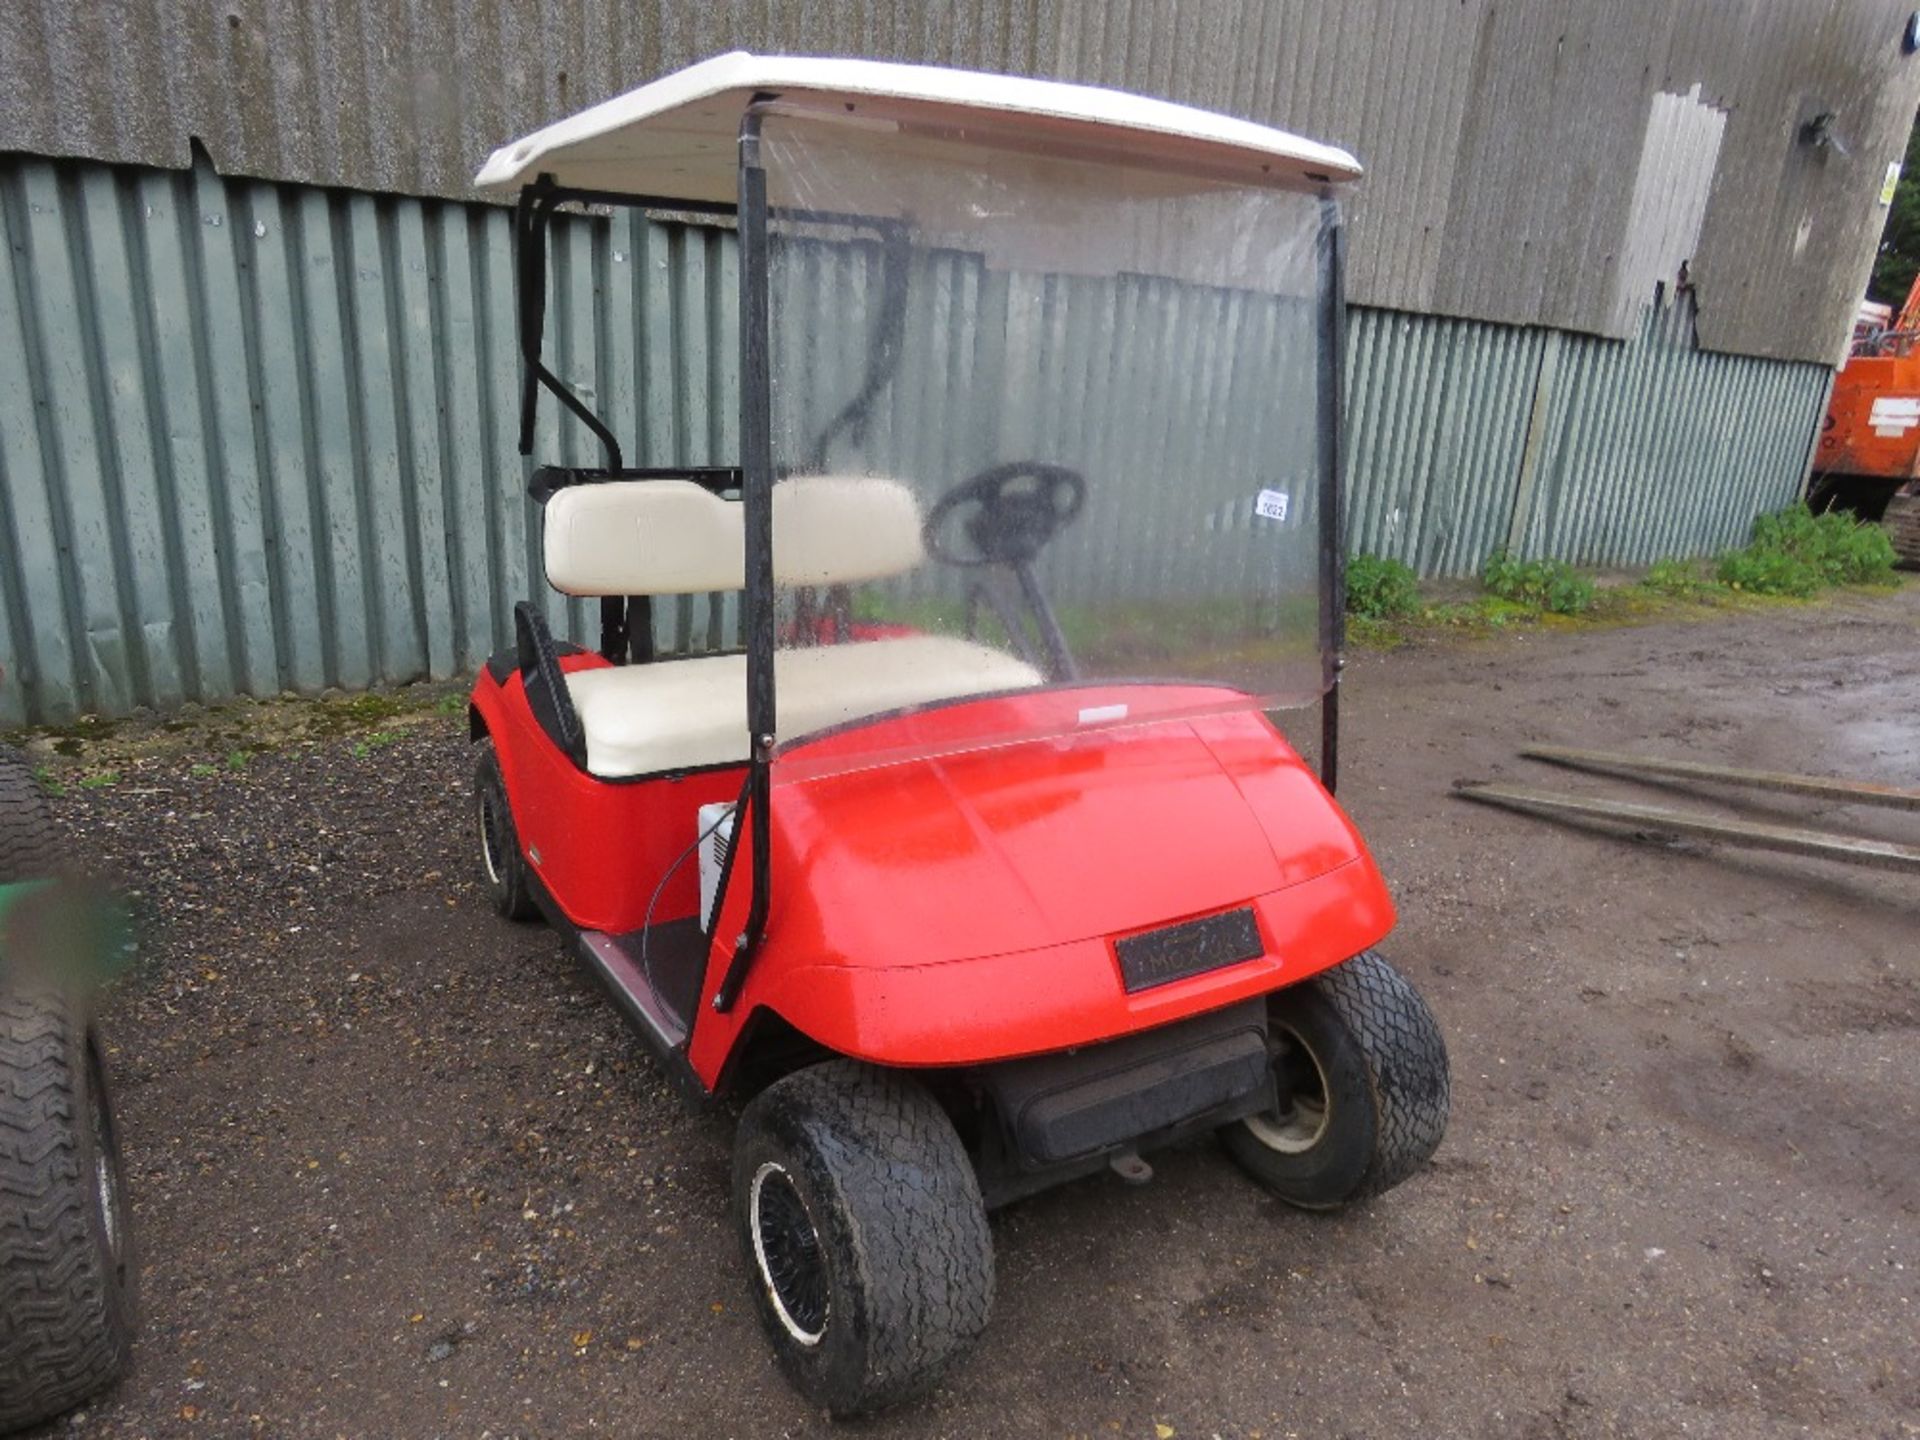 EZGO BATTERY POWERED GOLF BUGGY WITH CAHRGER AND KEY (NOT CHARGED...UNTESTED)....THIS LOT IS SOLD UN